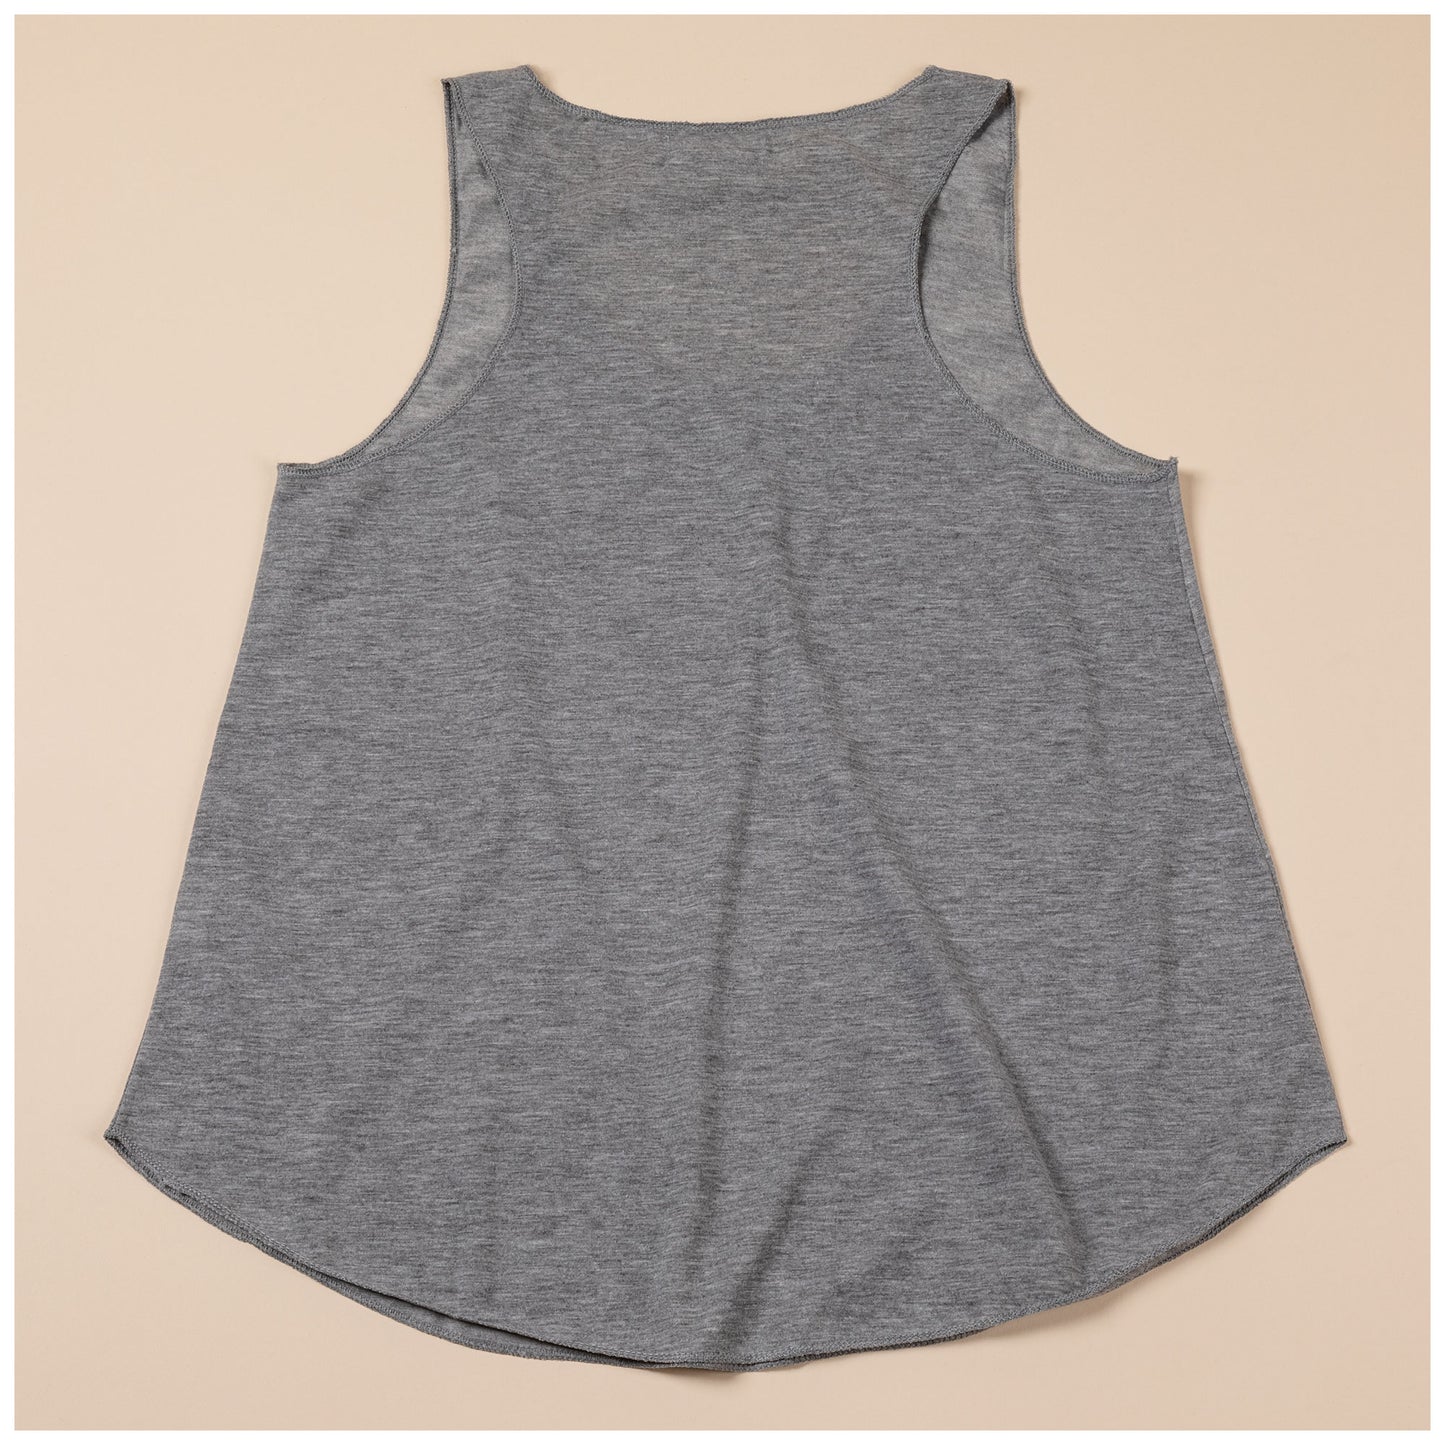 Paws To Meditate Tank Top